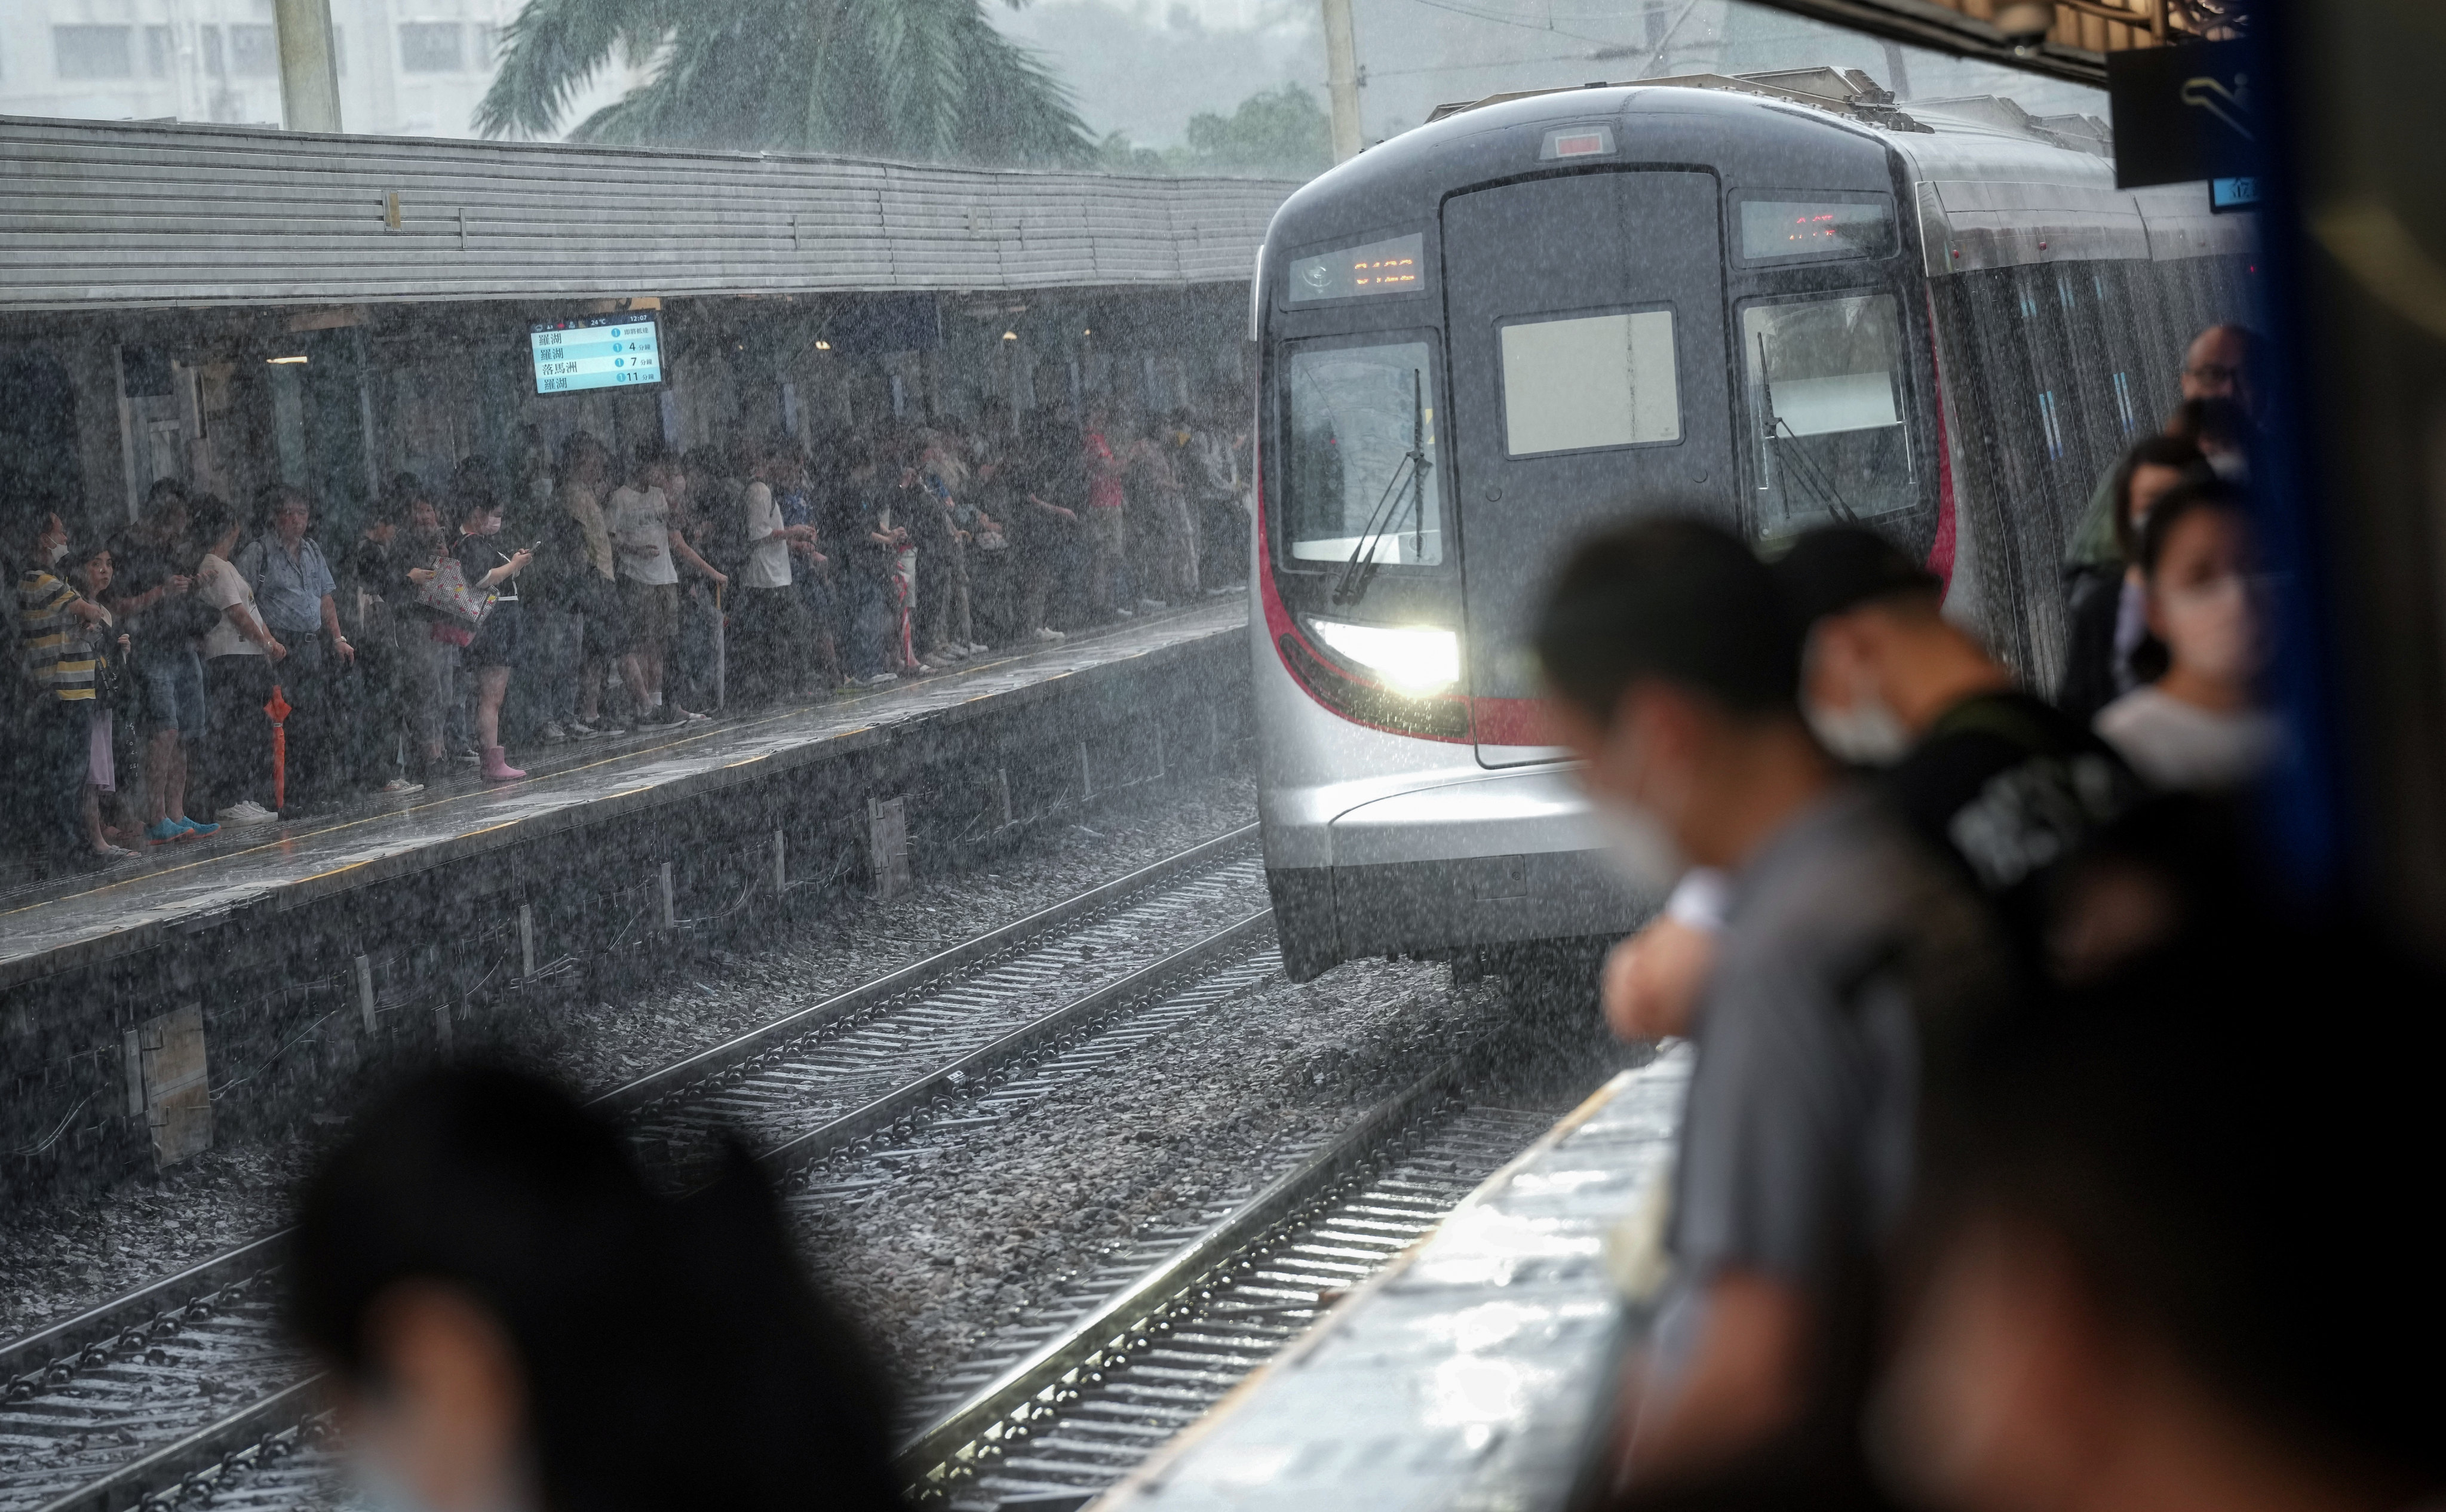 Open-air rail services under a No 9 or more typhoon alert in Hong Kong have to shut down, meaning airport arrivals have no way into the city except to scramble for taxis willing to operate in extreme weather. Photo: Elson LI